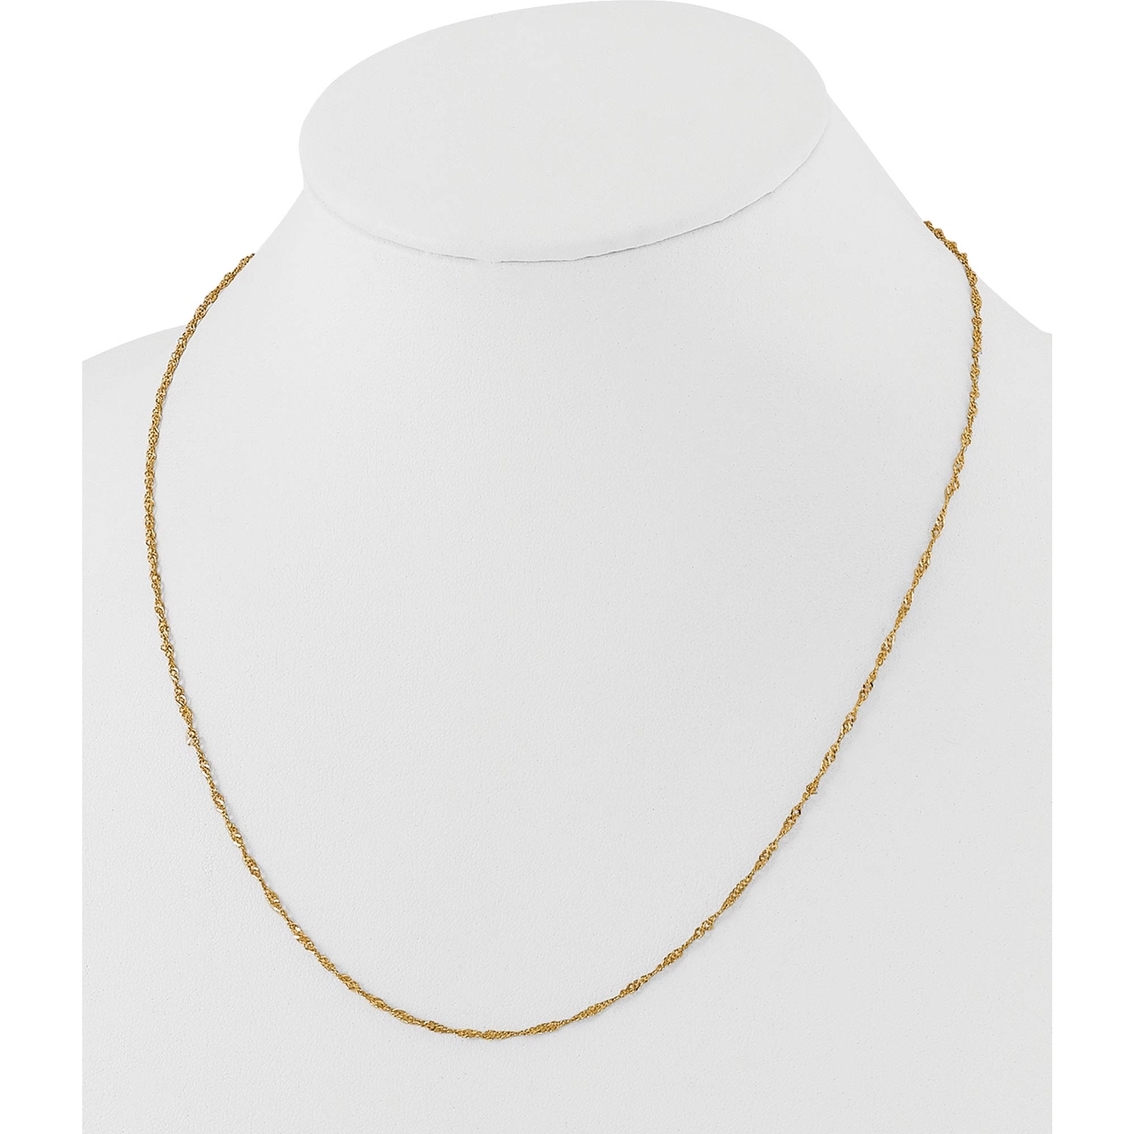 24K Pure Gold 1.6mm Singapore Chain Necklace - Image 6 of 7